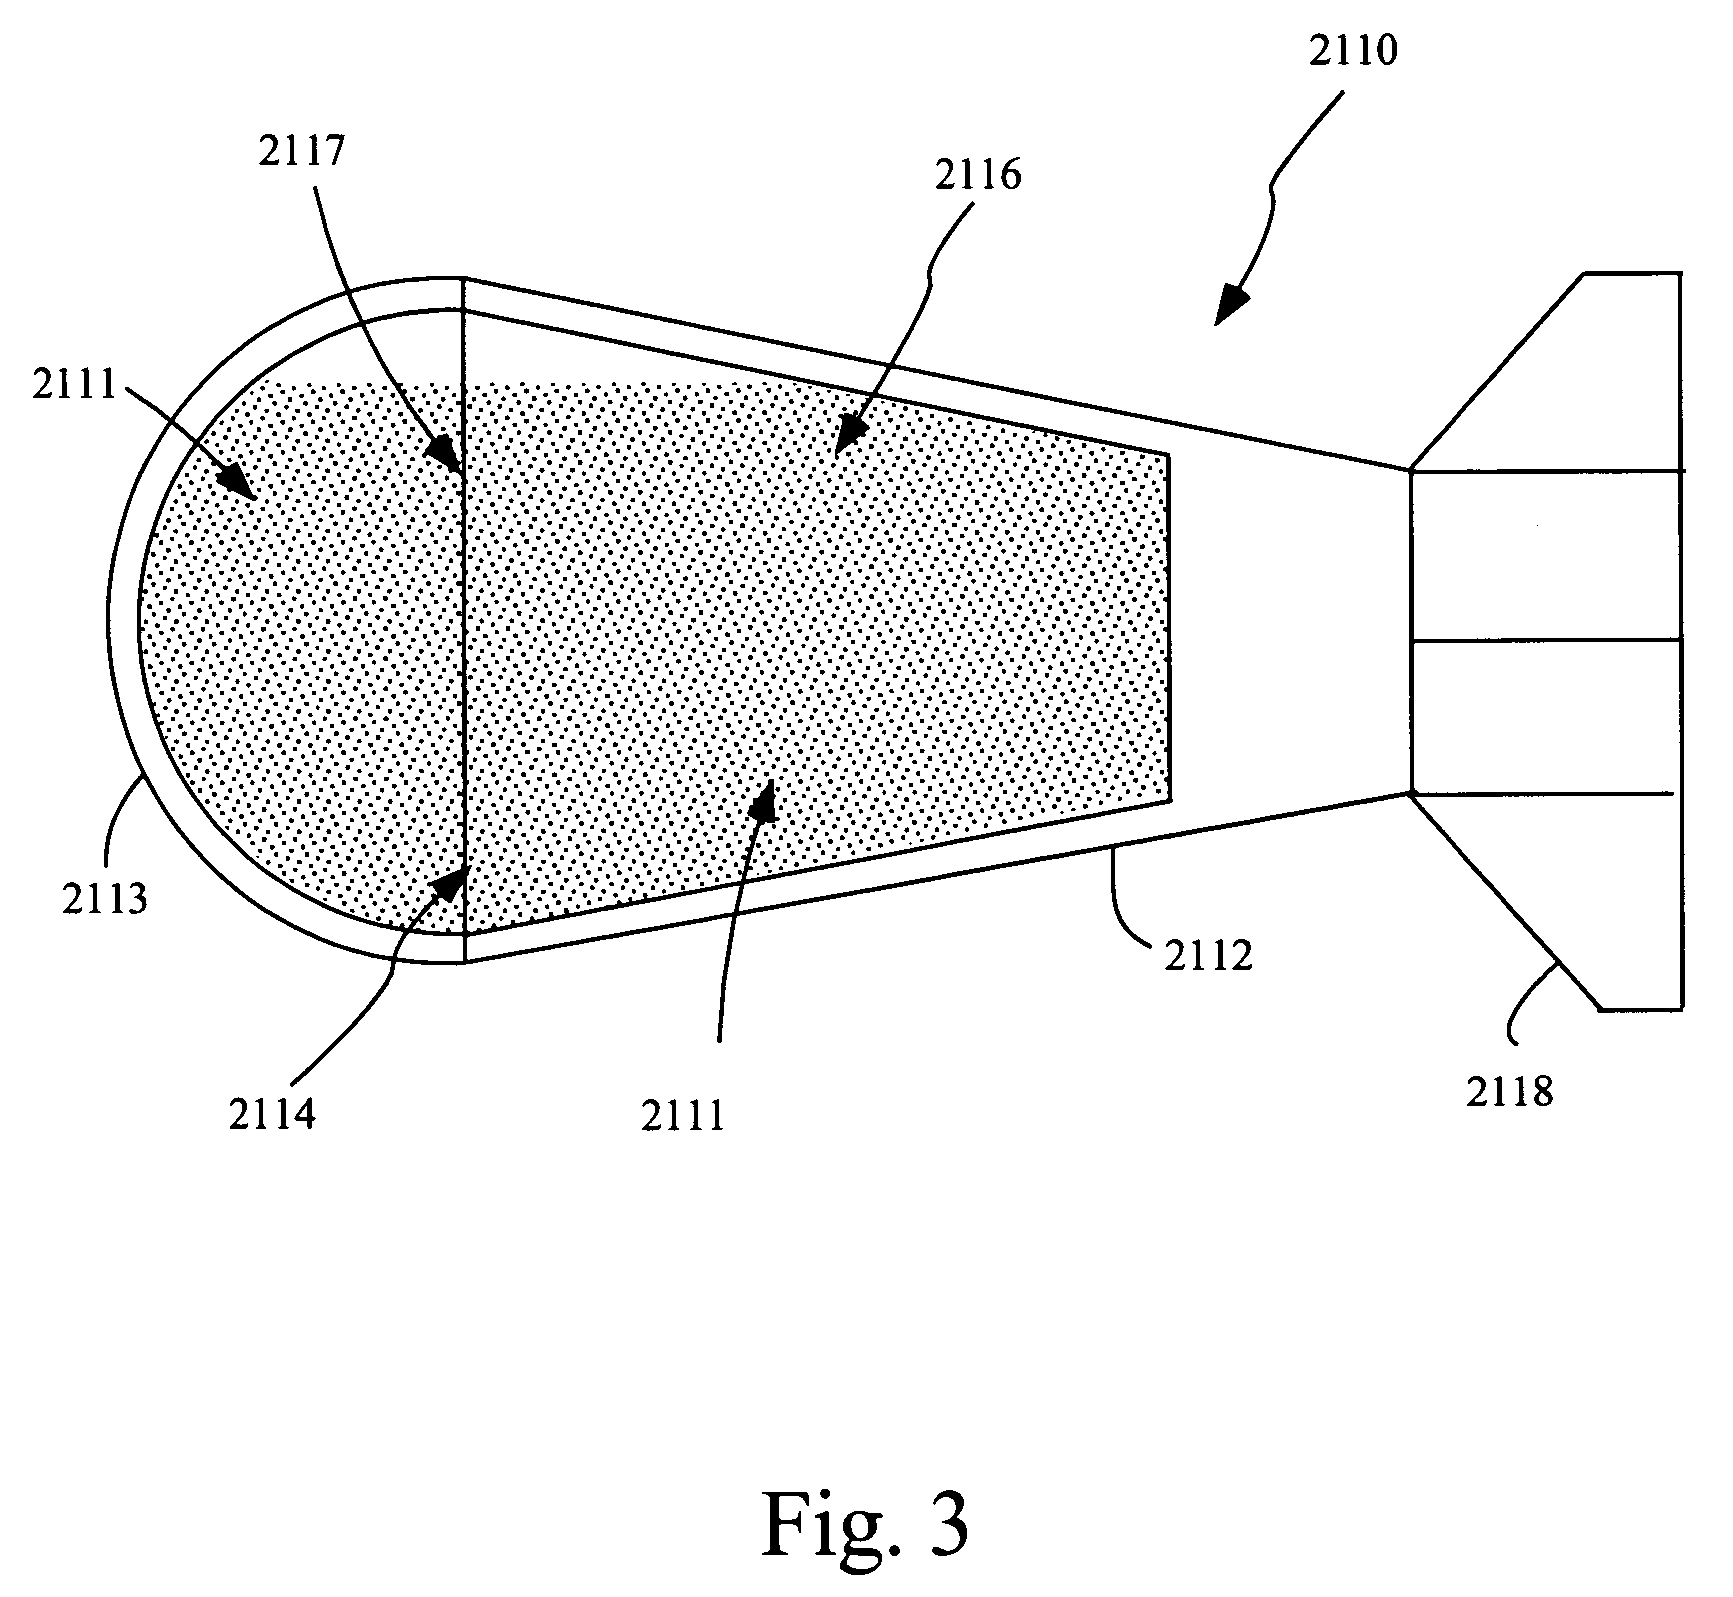 Stabilized non-lethal projectile systems